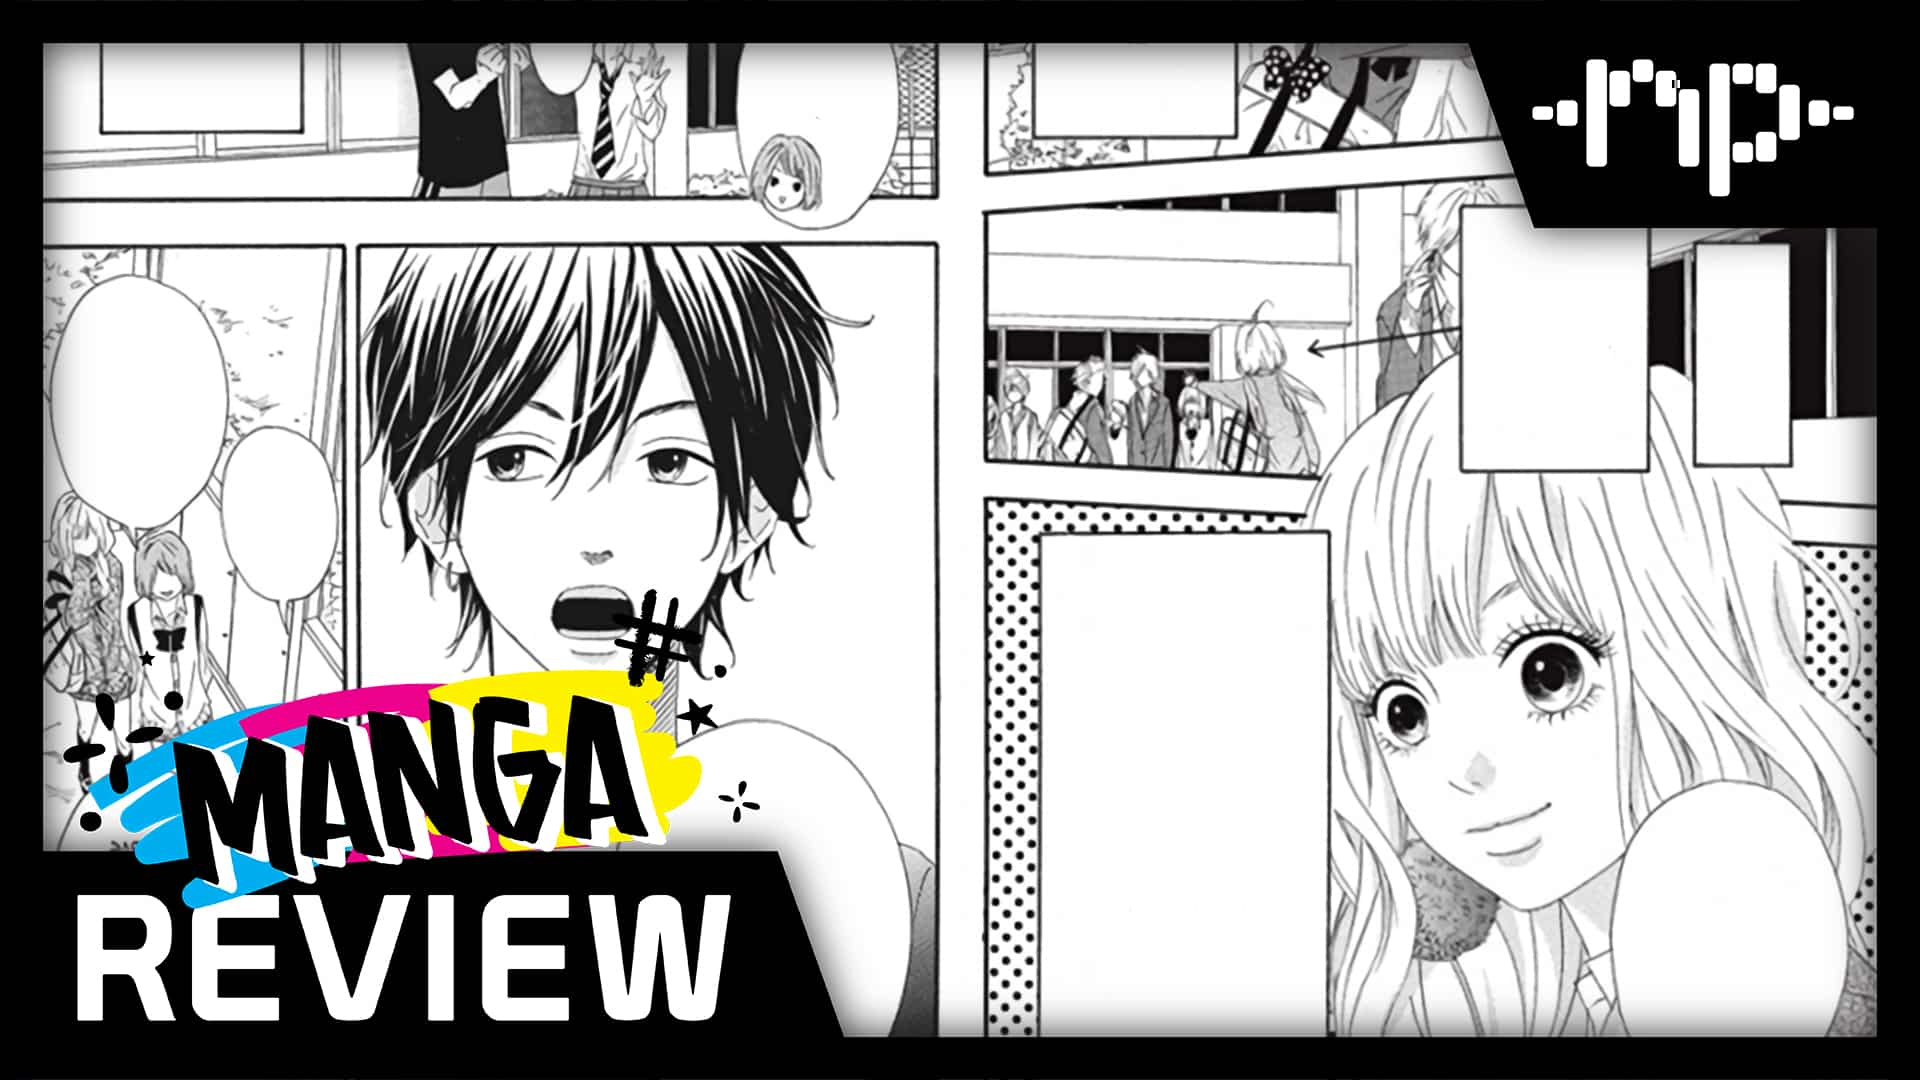 No Longer Heroine Vol. 1 Review – Grounded Romance That Hits Close to Home